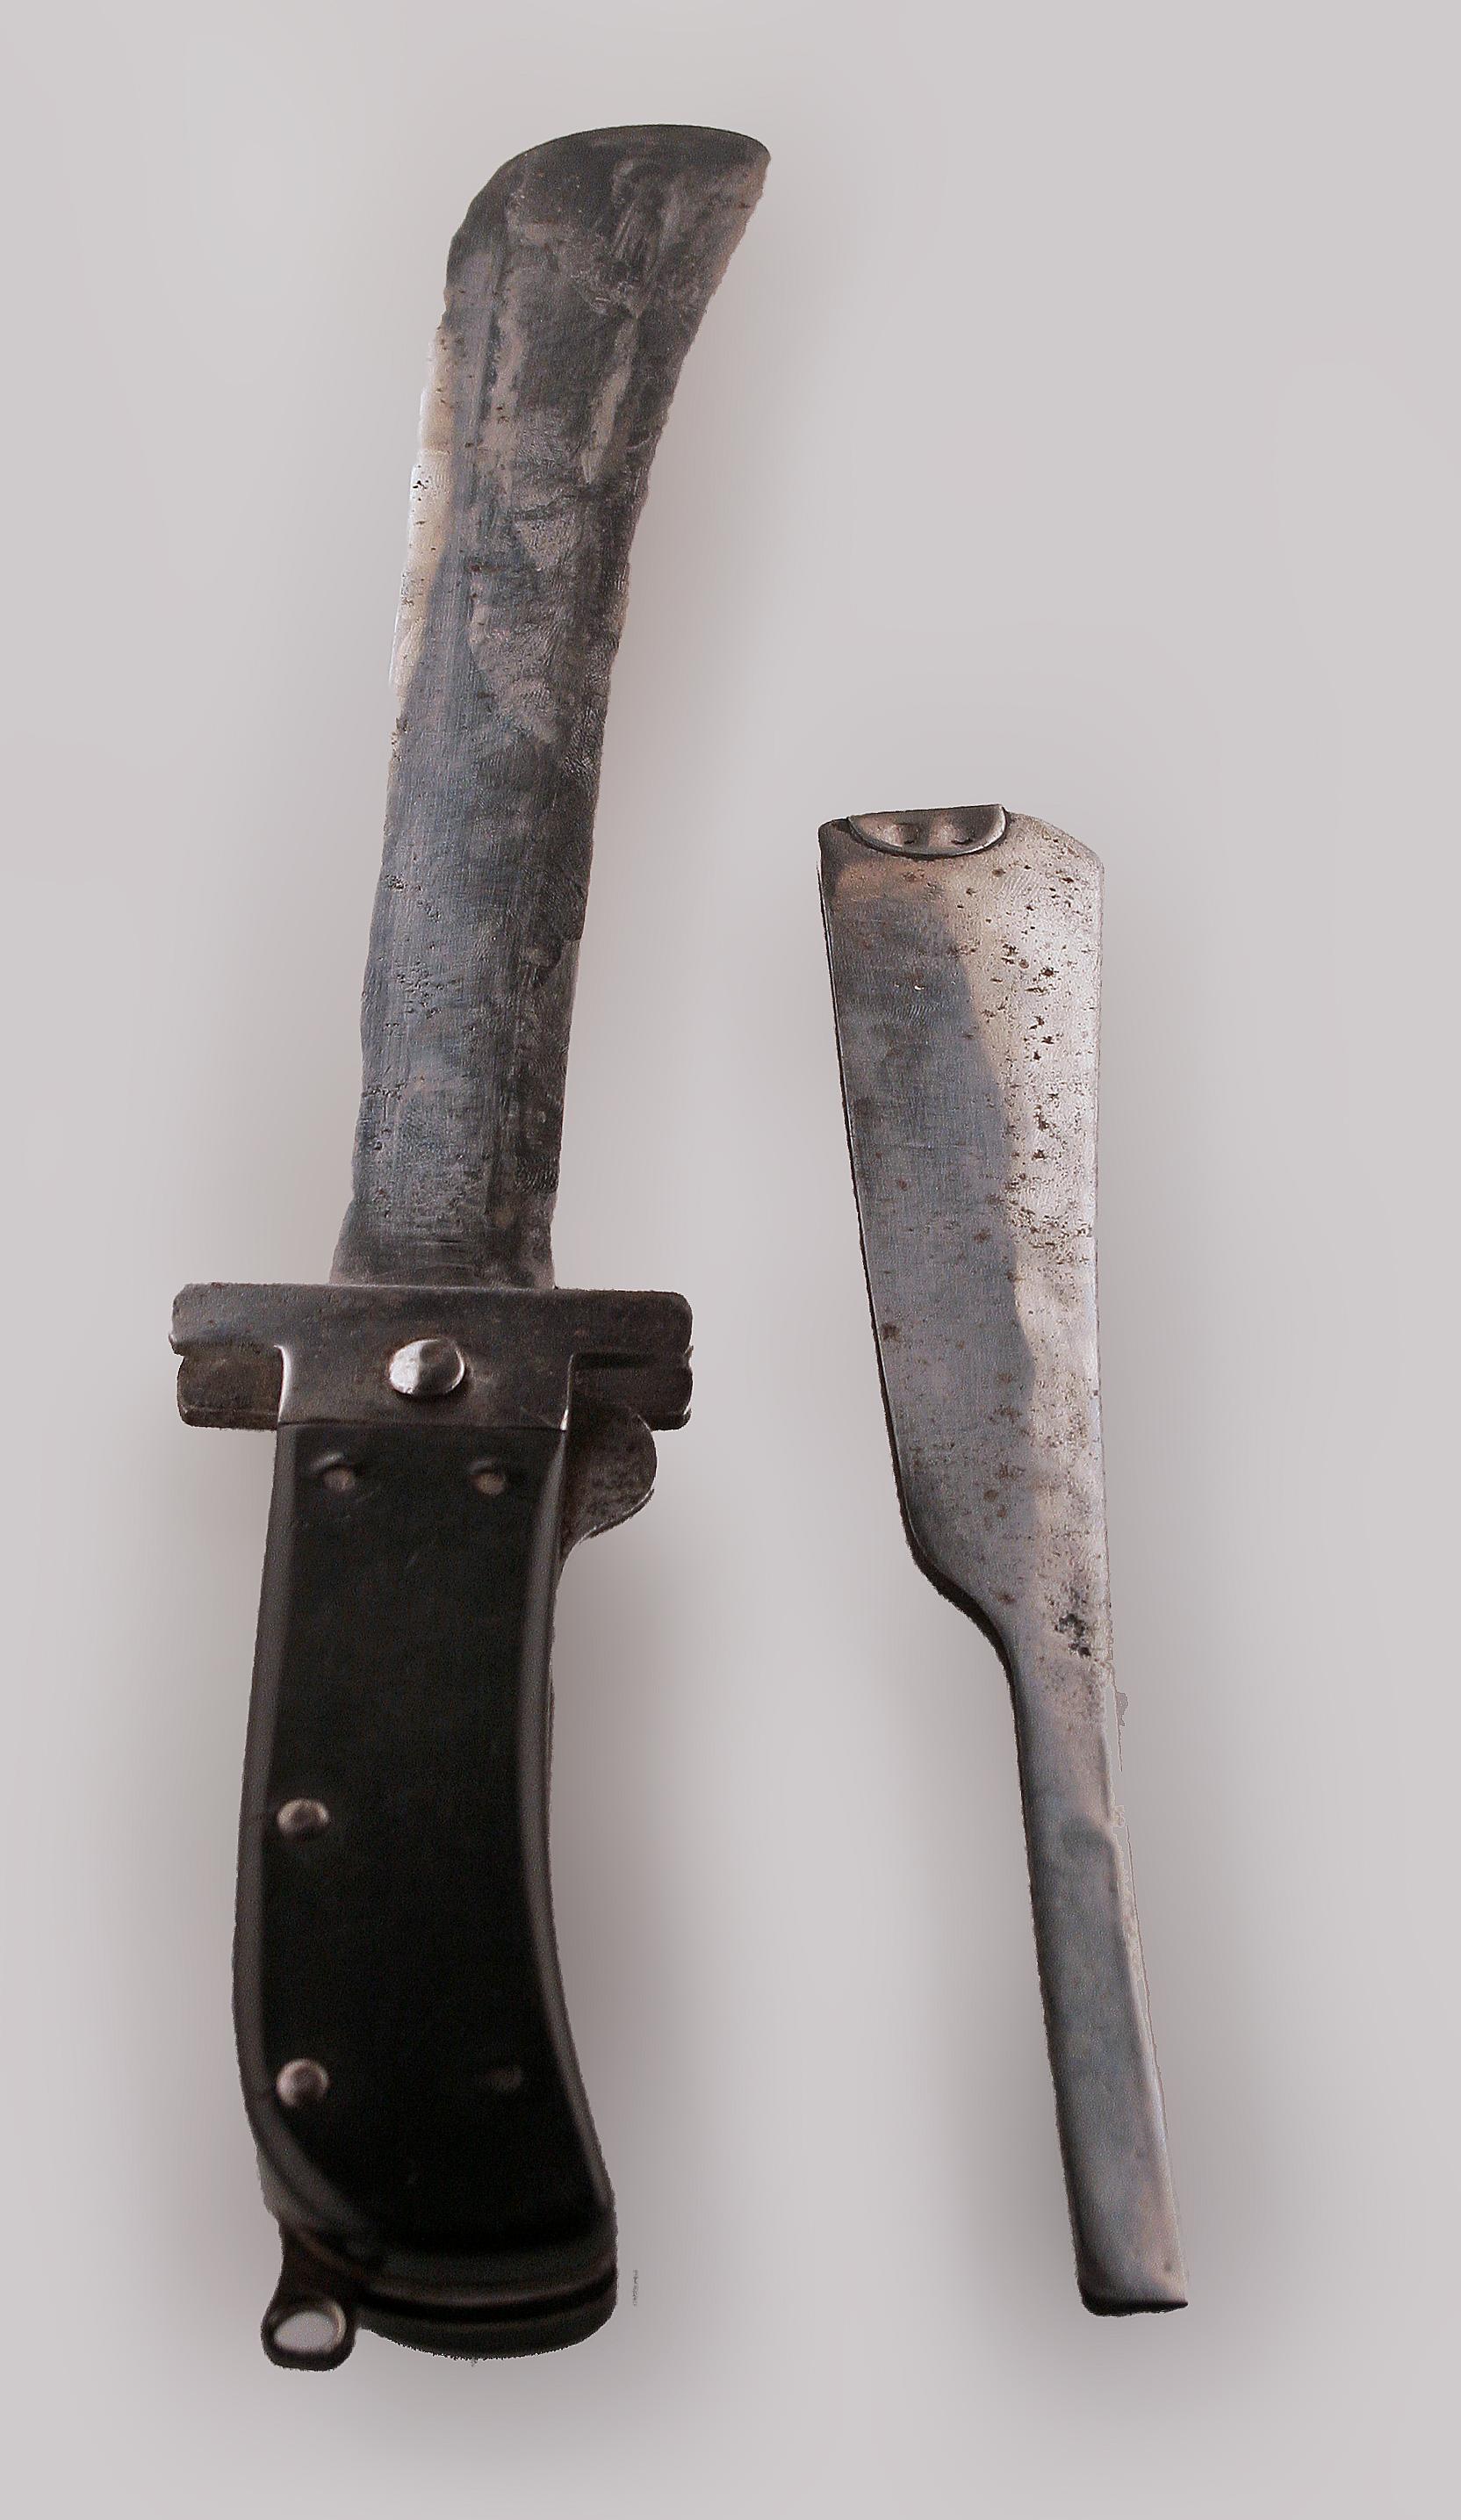 Mid-20th century british military folding steel blade machete/sword by Joseph Westby & Co.

By: Joseph Westby & Co.
Material: steel, metal, iron, synthetic, bakelite
Technique: hammered, plated, molded, polished, forged, cast, metalwork
Dimensions: